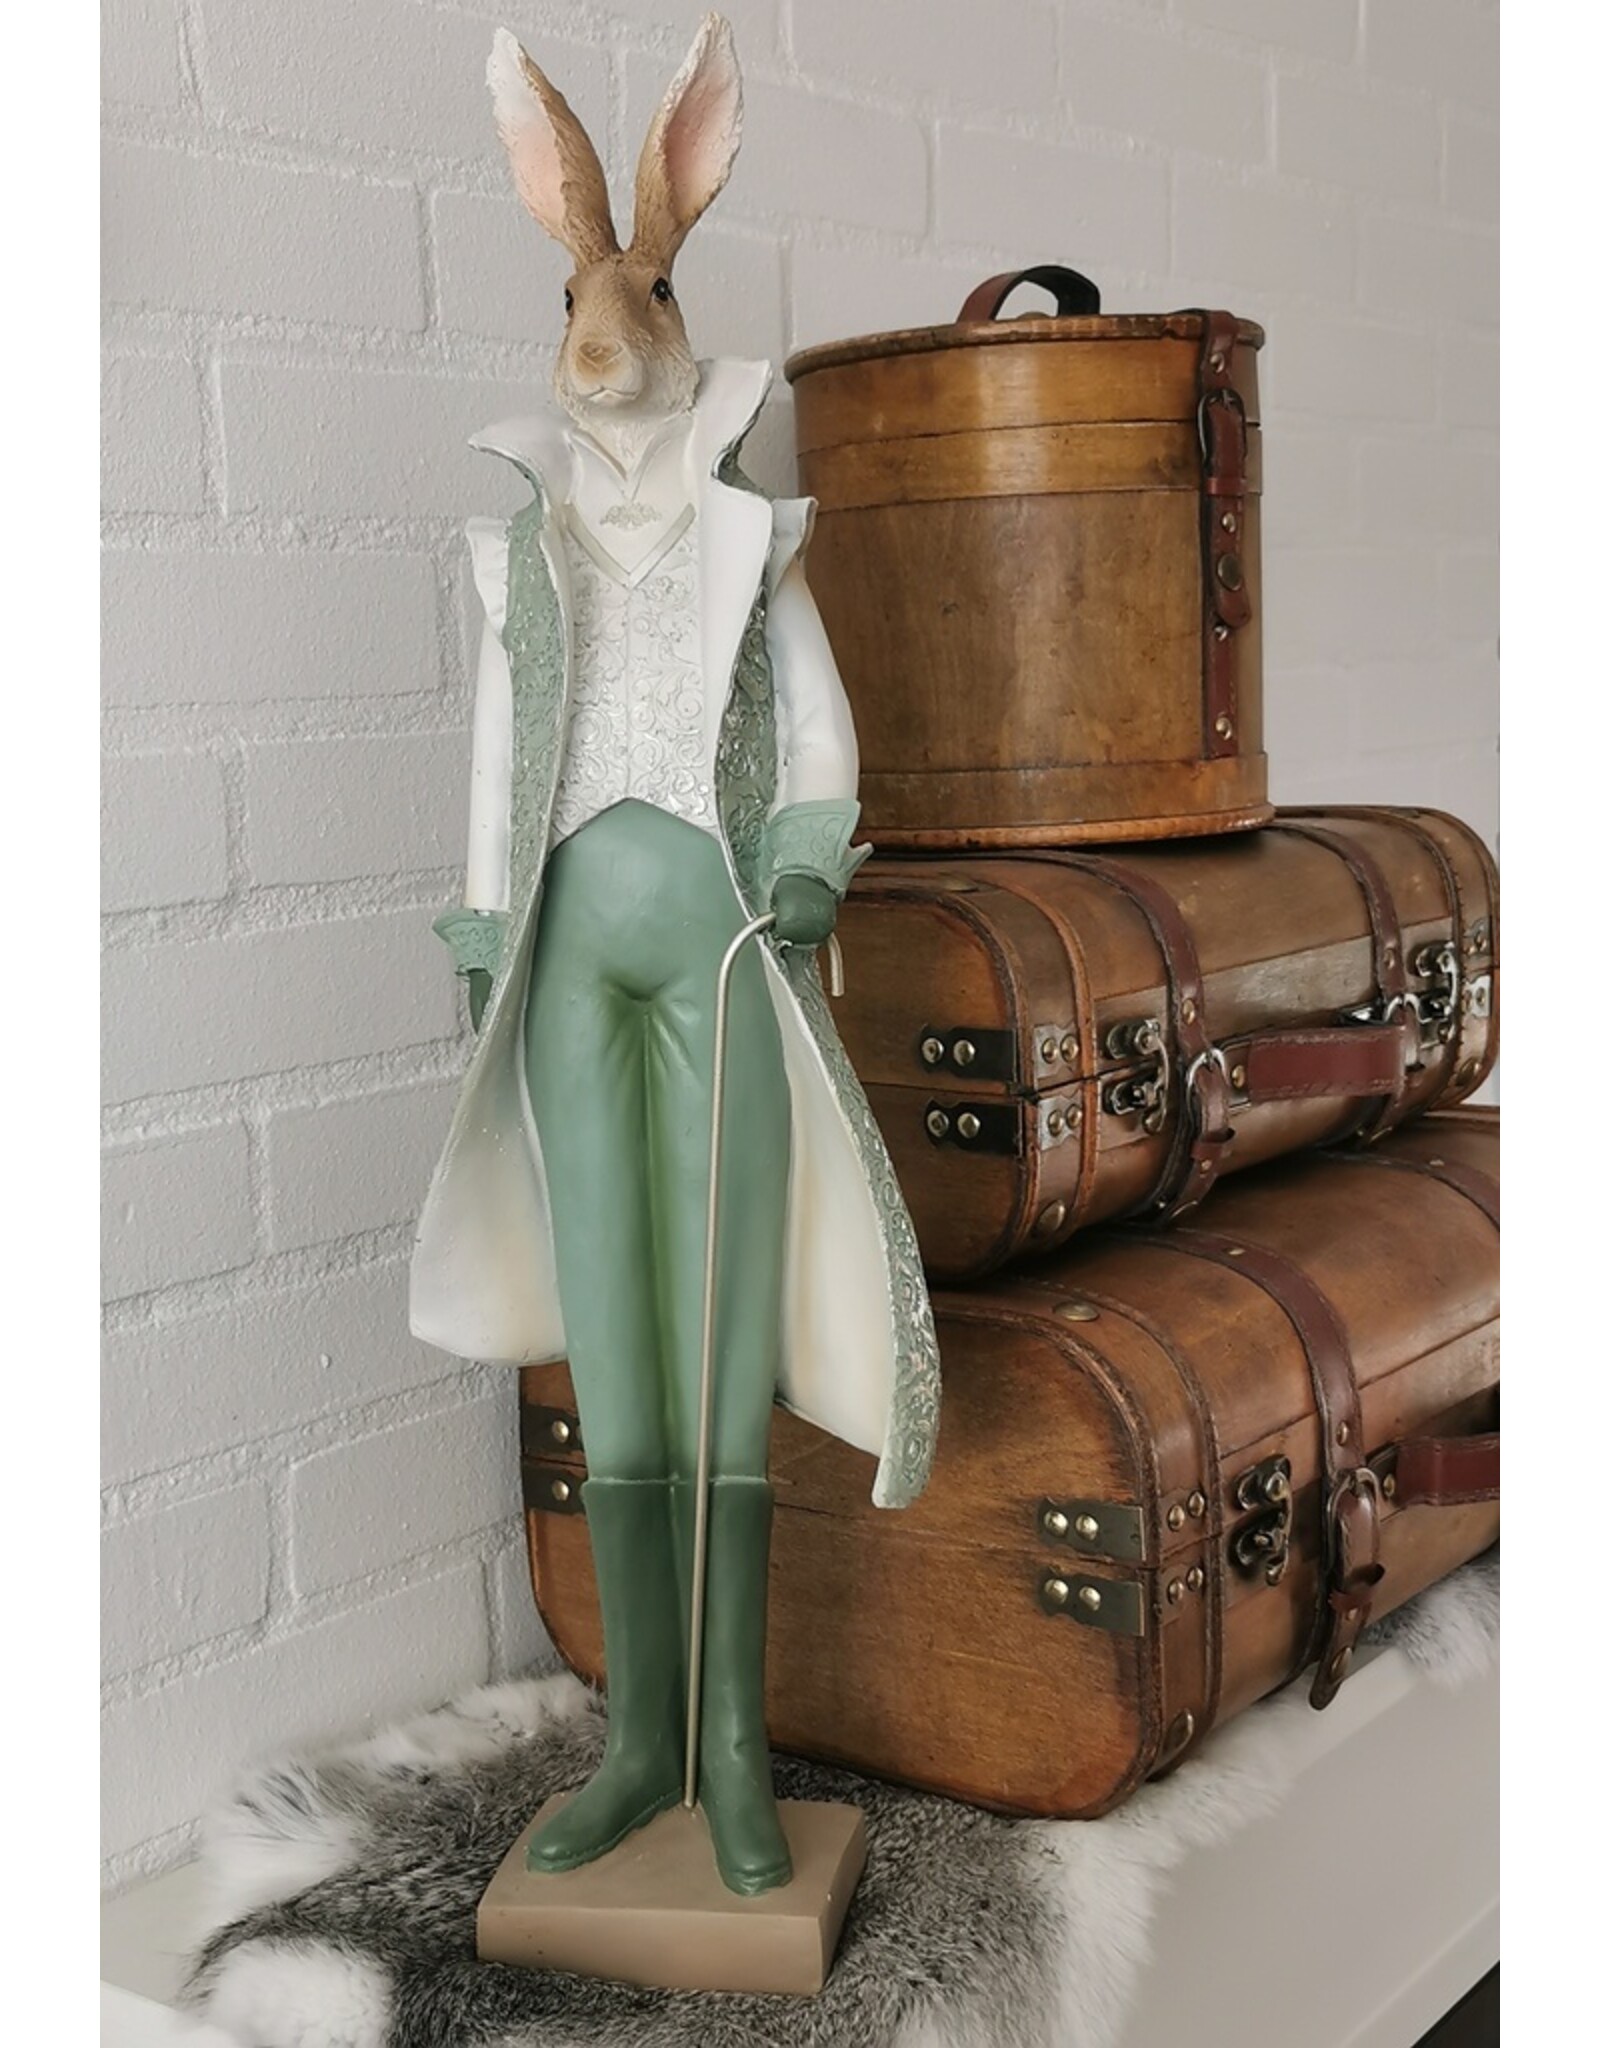 C&E Giftware Figurines Collectables - Rabbit in Green Victorian Coat 61cm